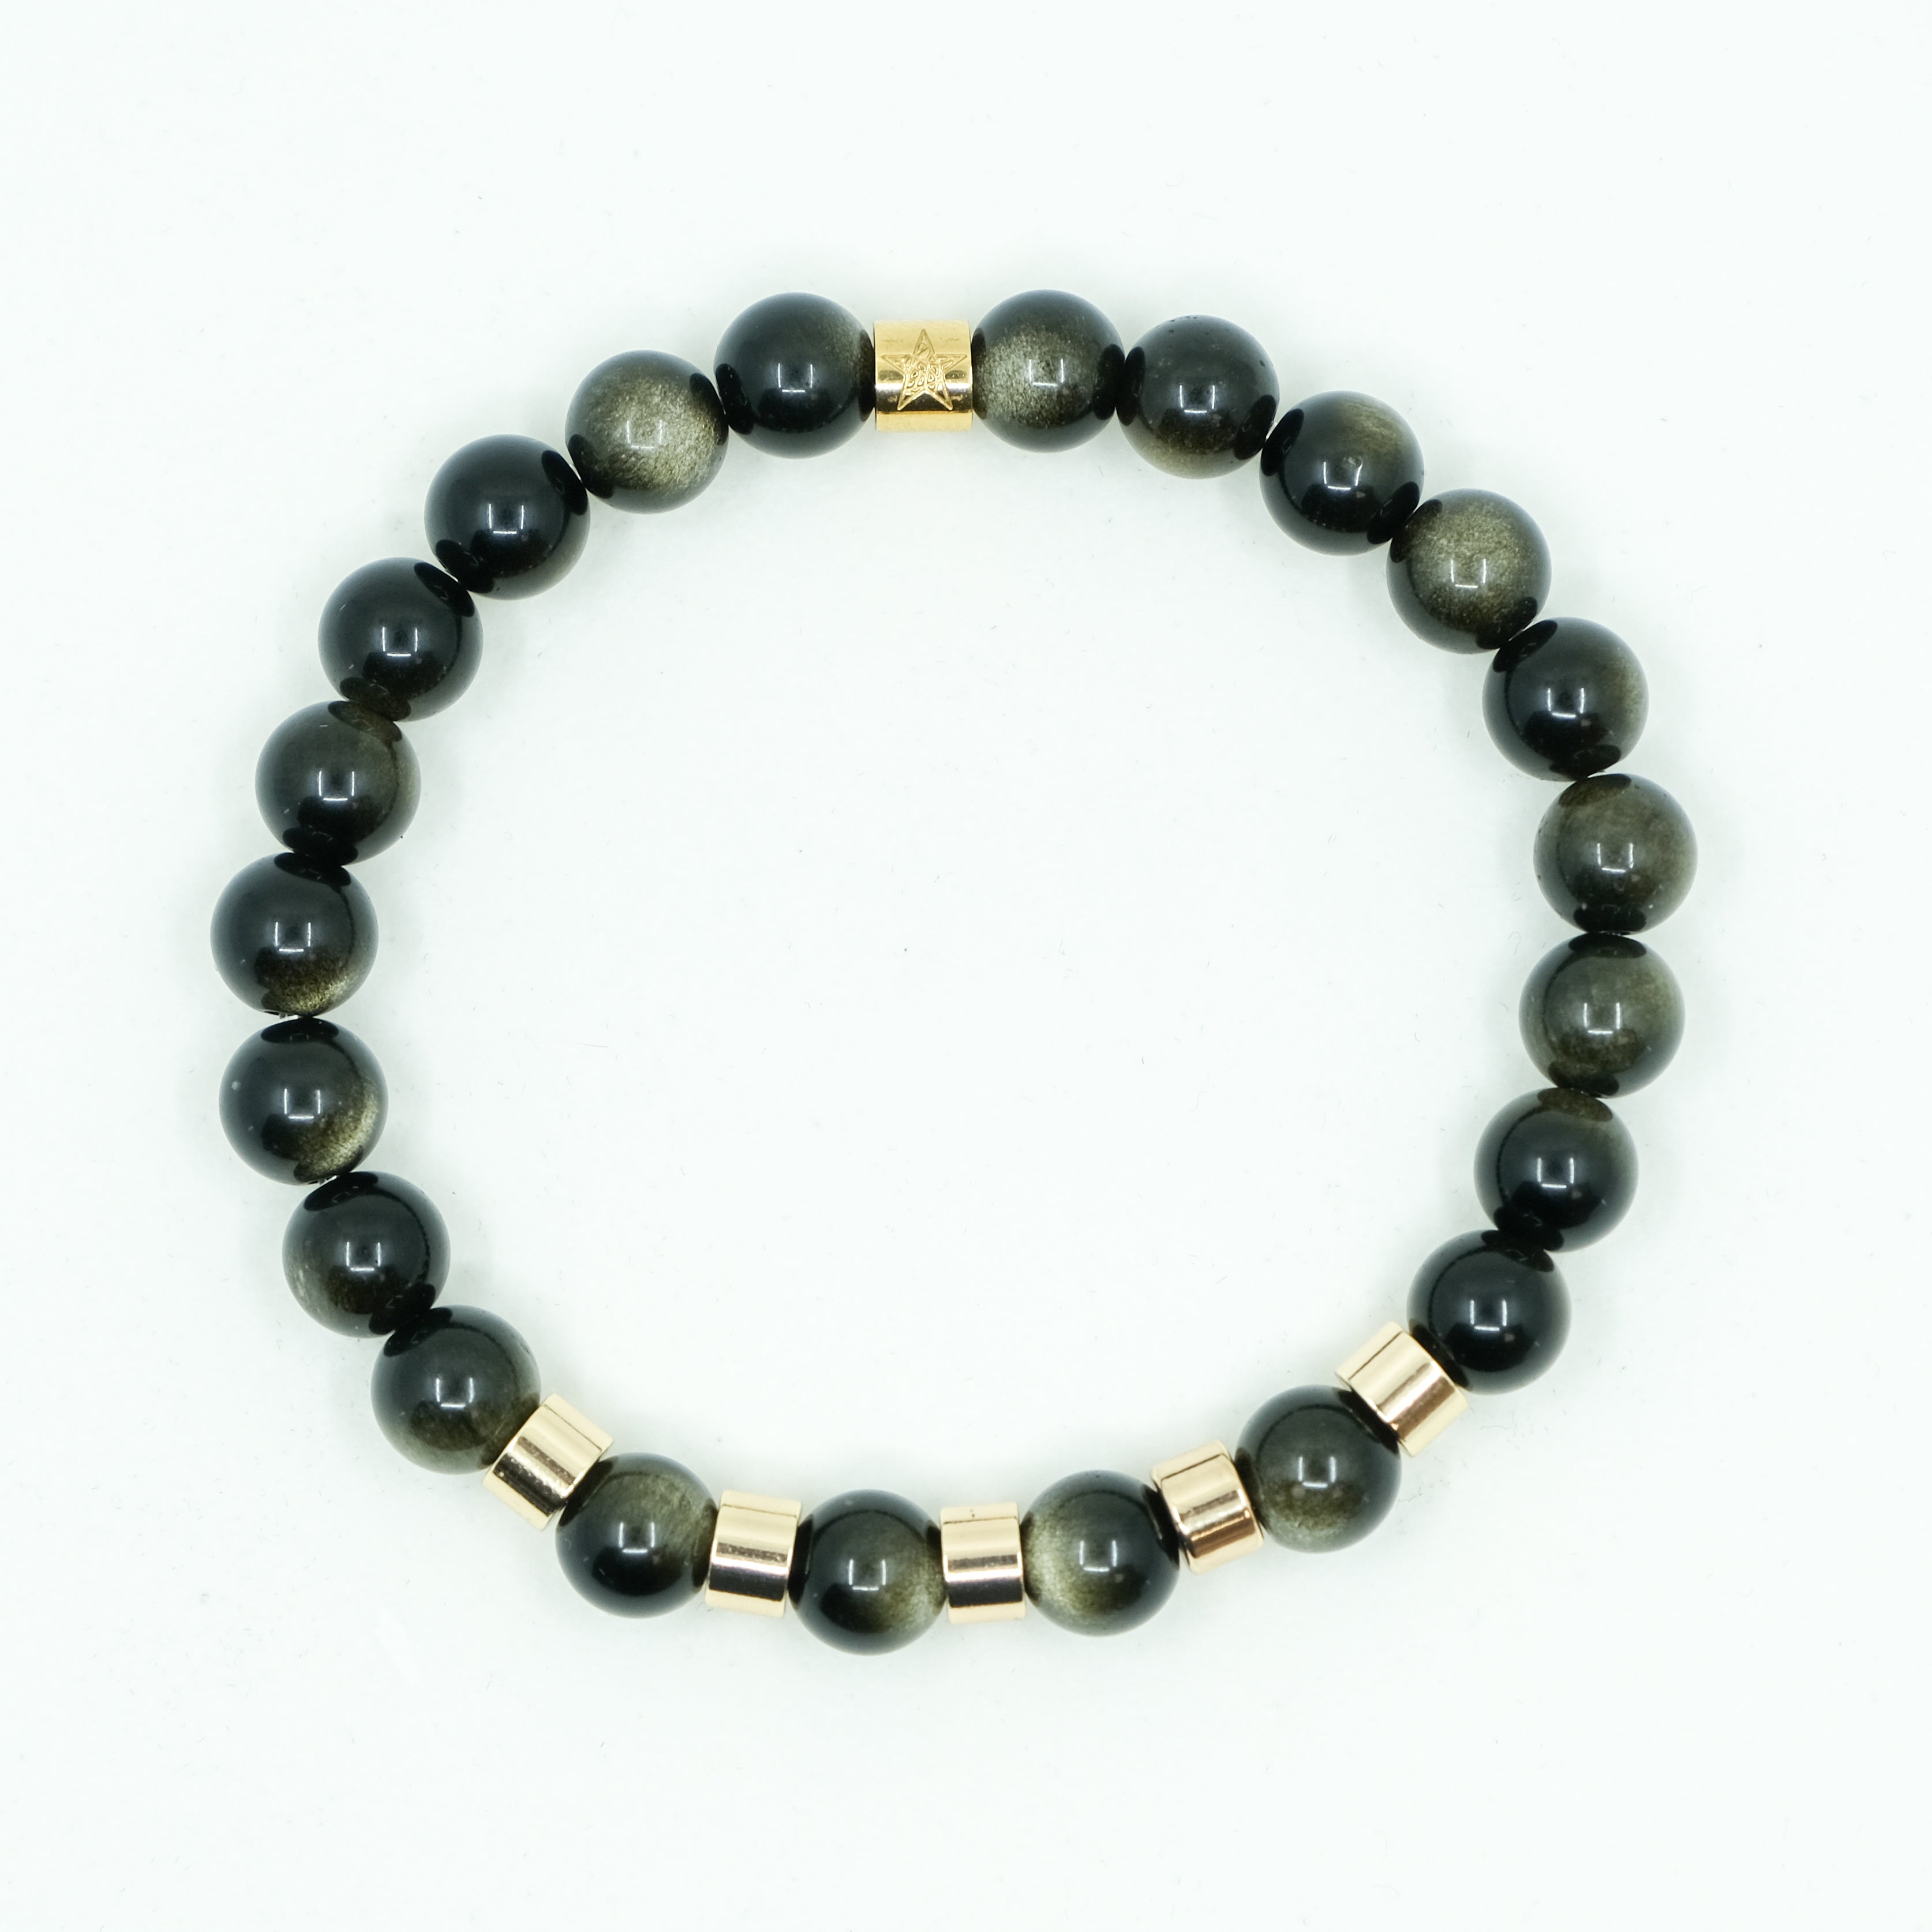 A golden obsidian gemstone bracelet with gold plated accessories from above